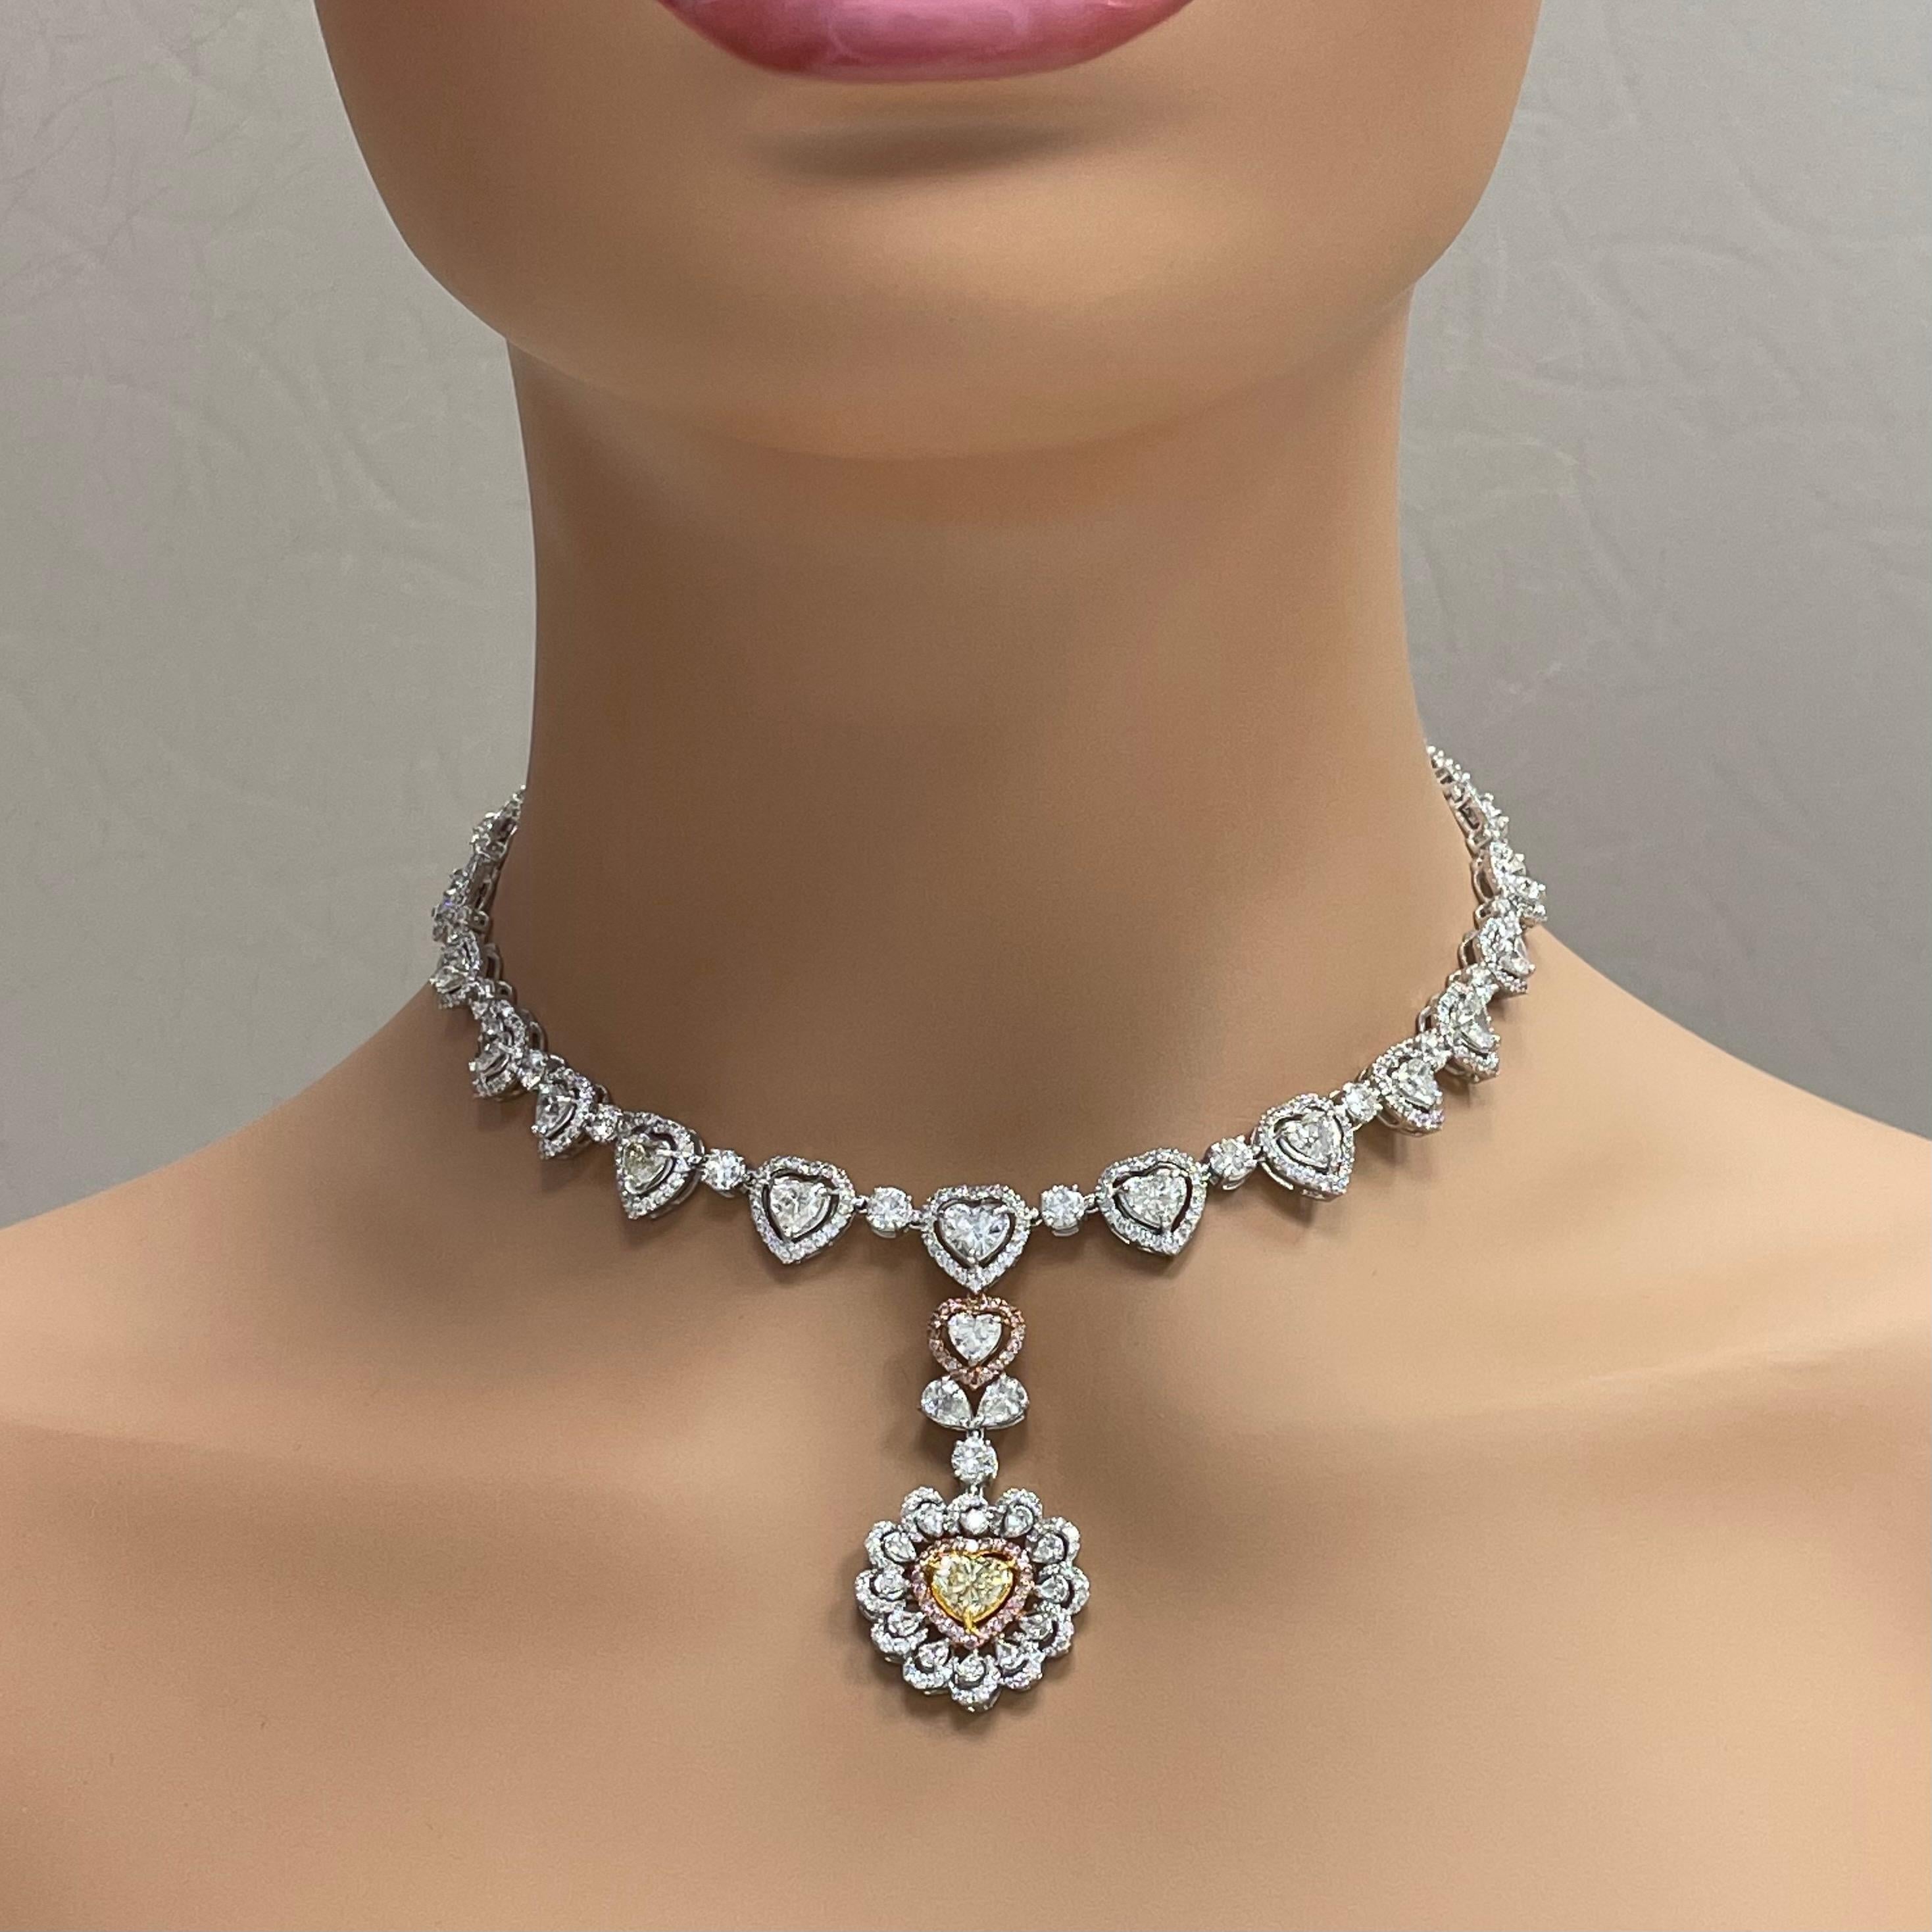 necklace and earring set diamond